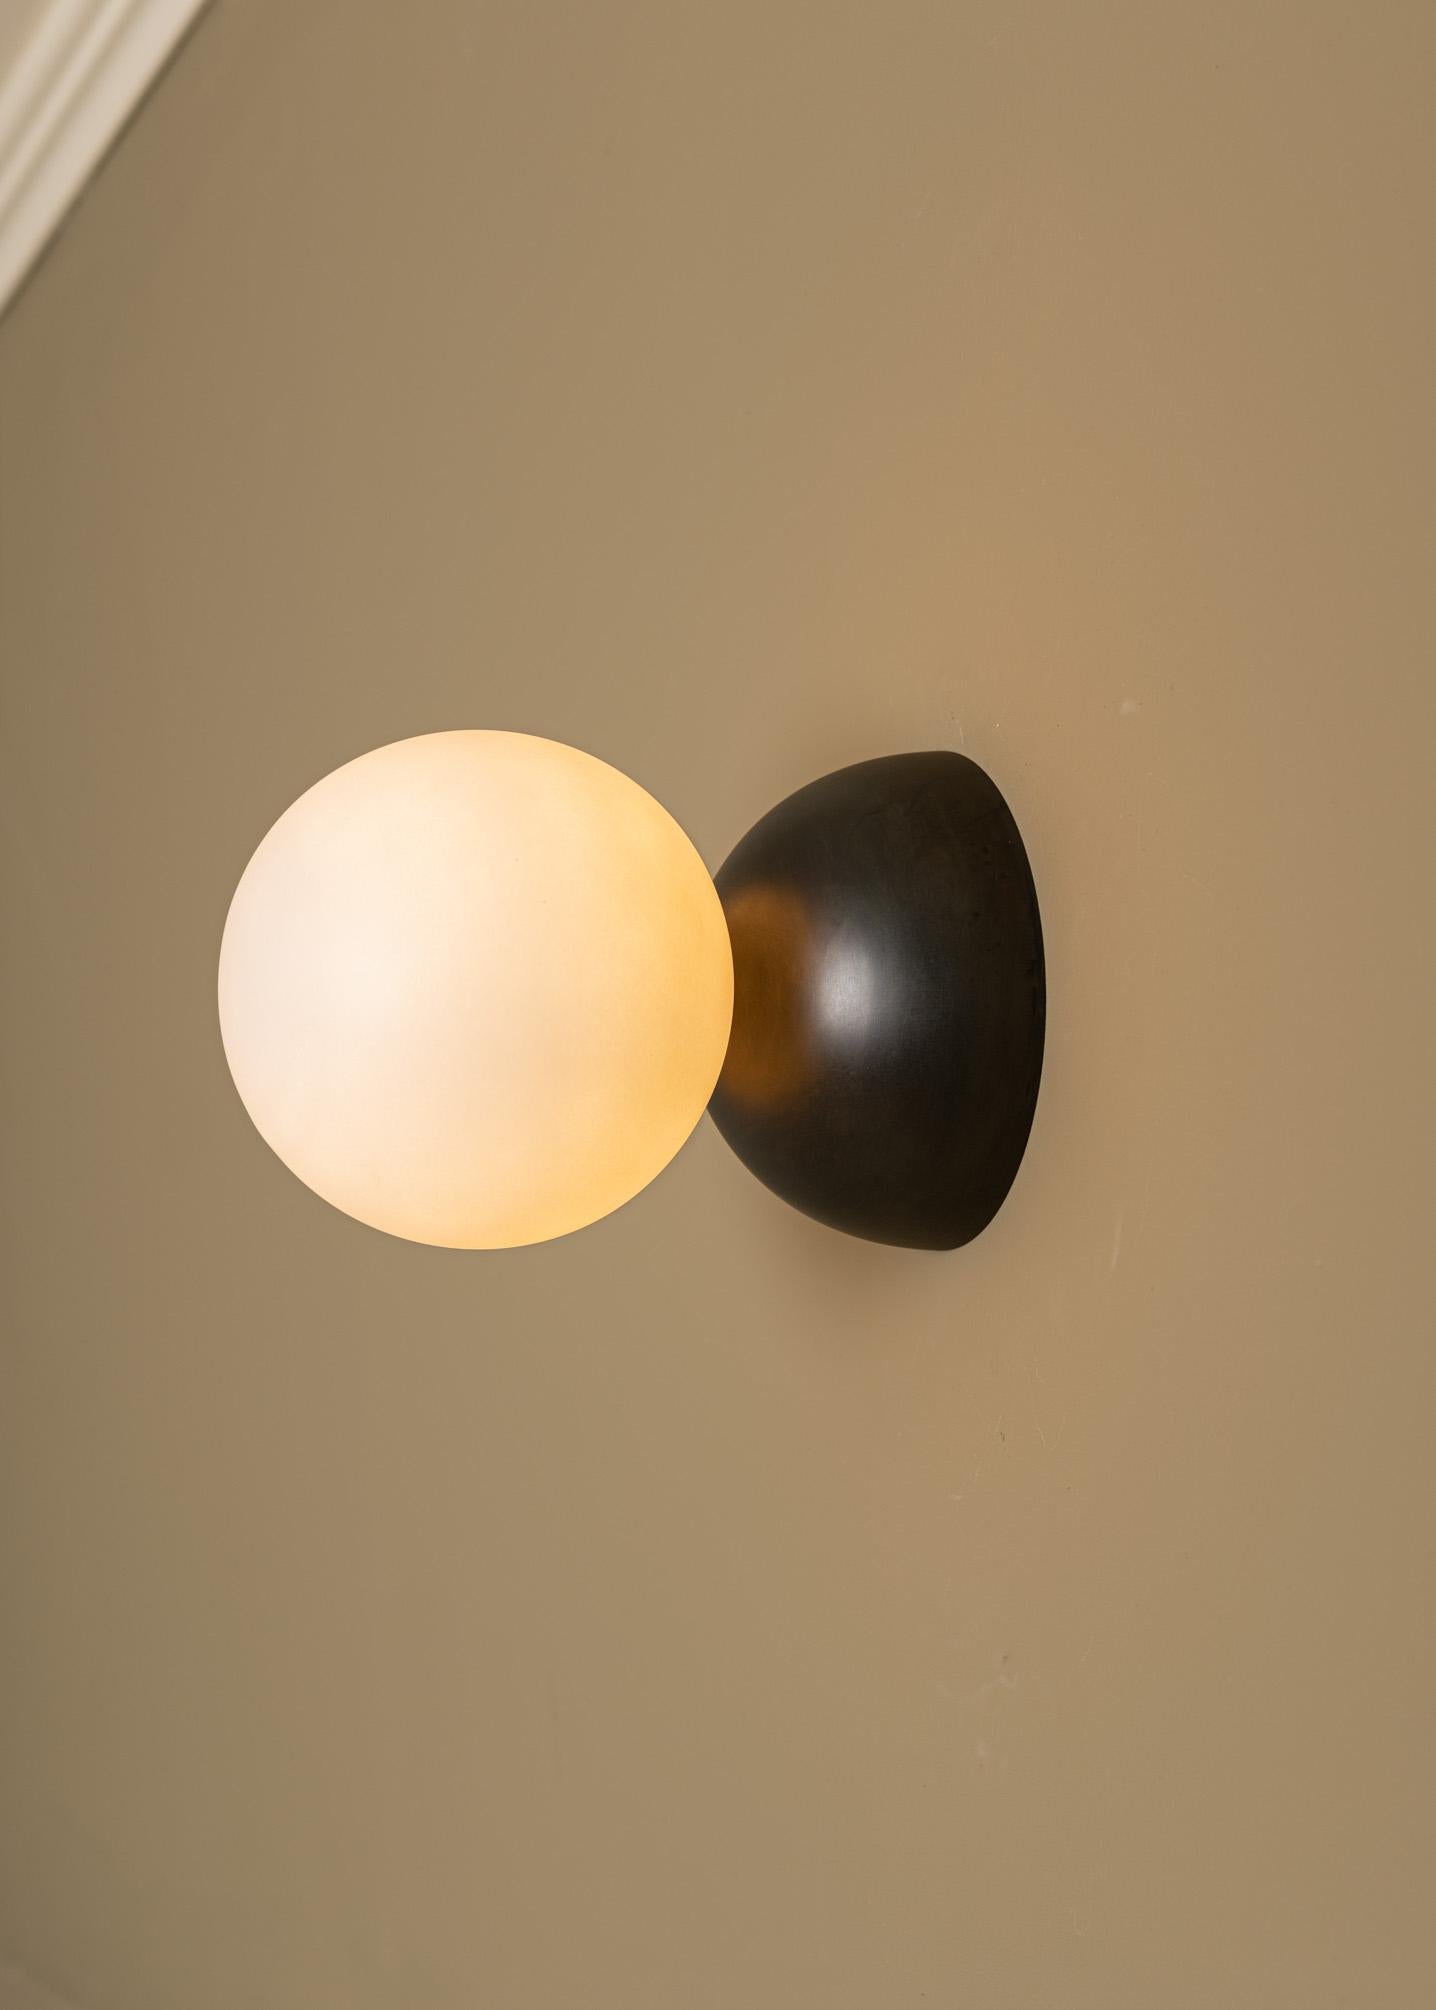 Eklipso Blackened Steel Wall Sconce by Simone & Marcel
Dimensions: D 19,5 x W 14 x H 14 cm.
Materials: Blackened steel and glass.

Available in different marble, brass, steel and alabaster options and finishes. Custom options available on request.